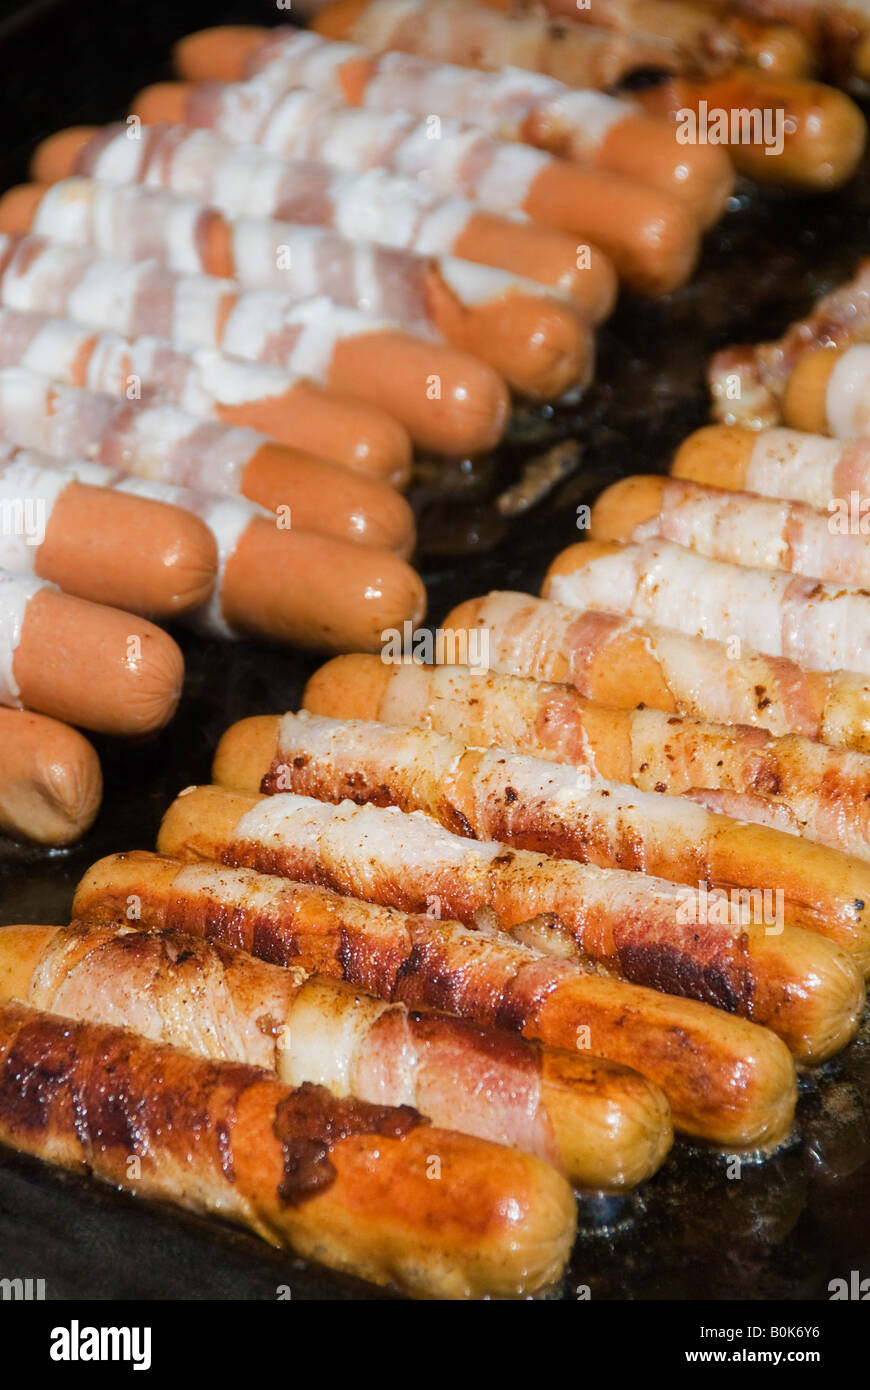 Bacon wrapped hot dogs sizzle on the grill Stock Photo